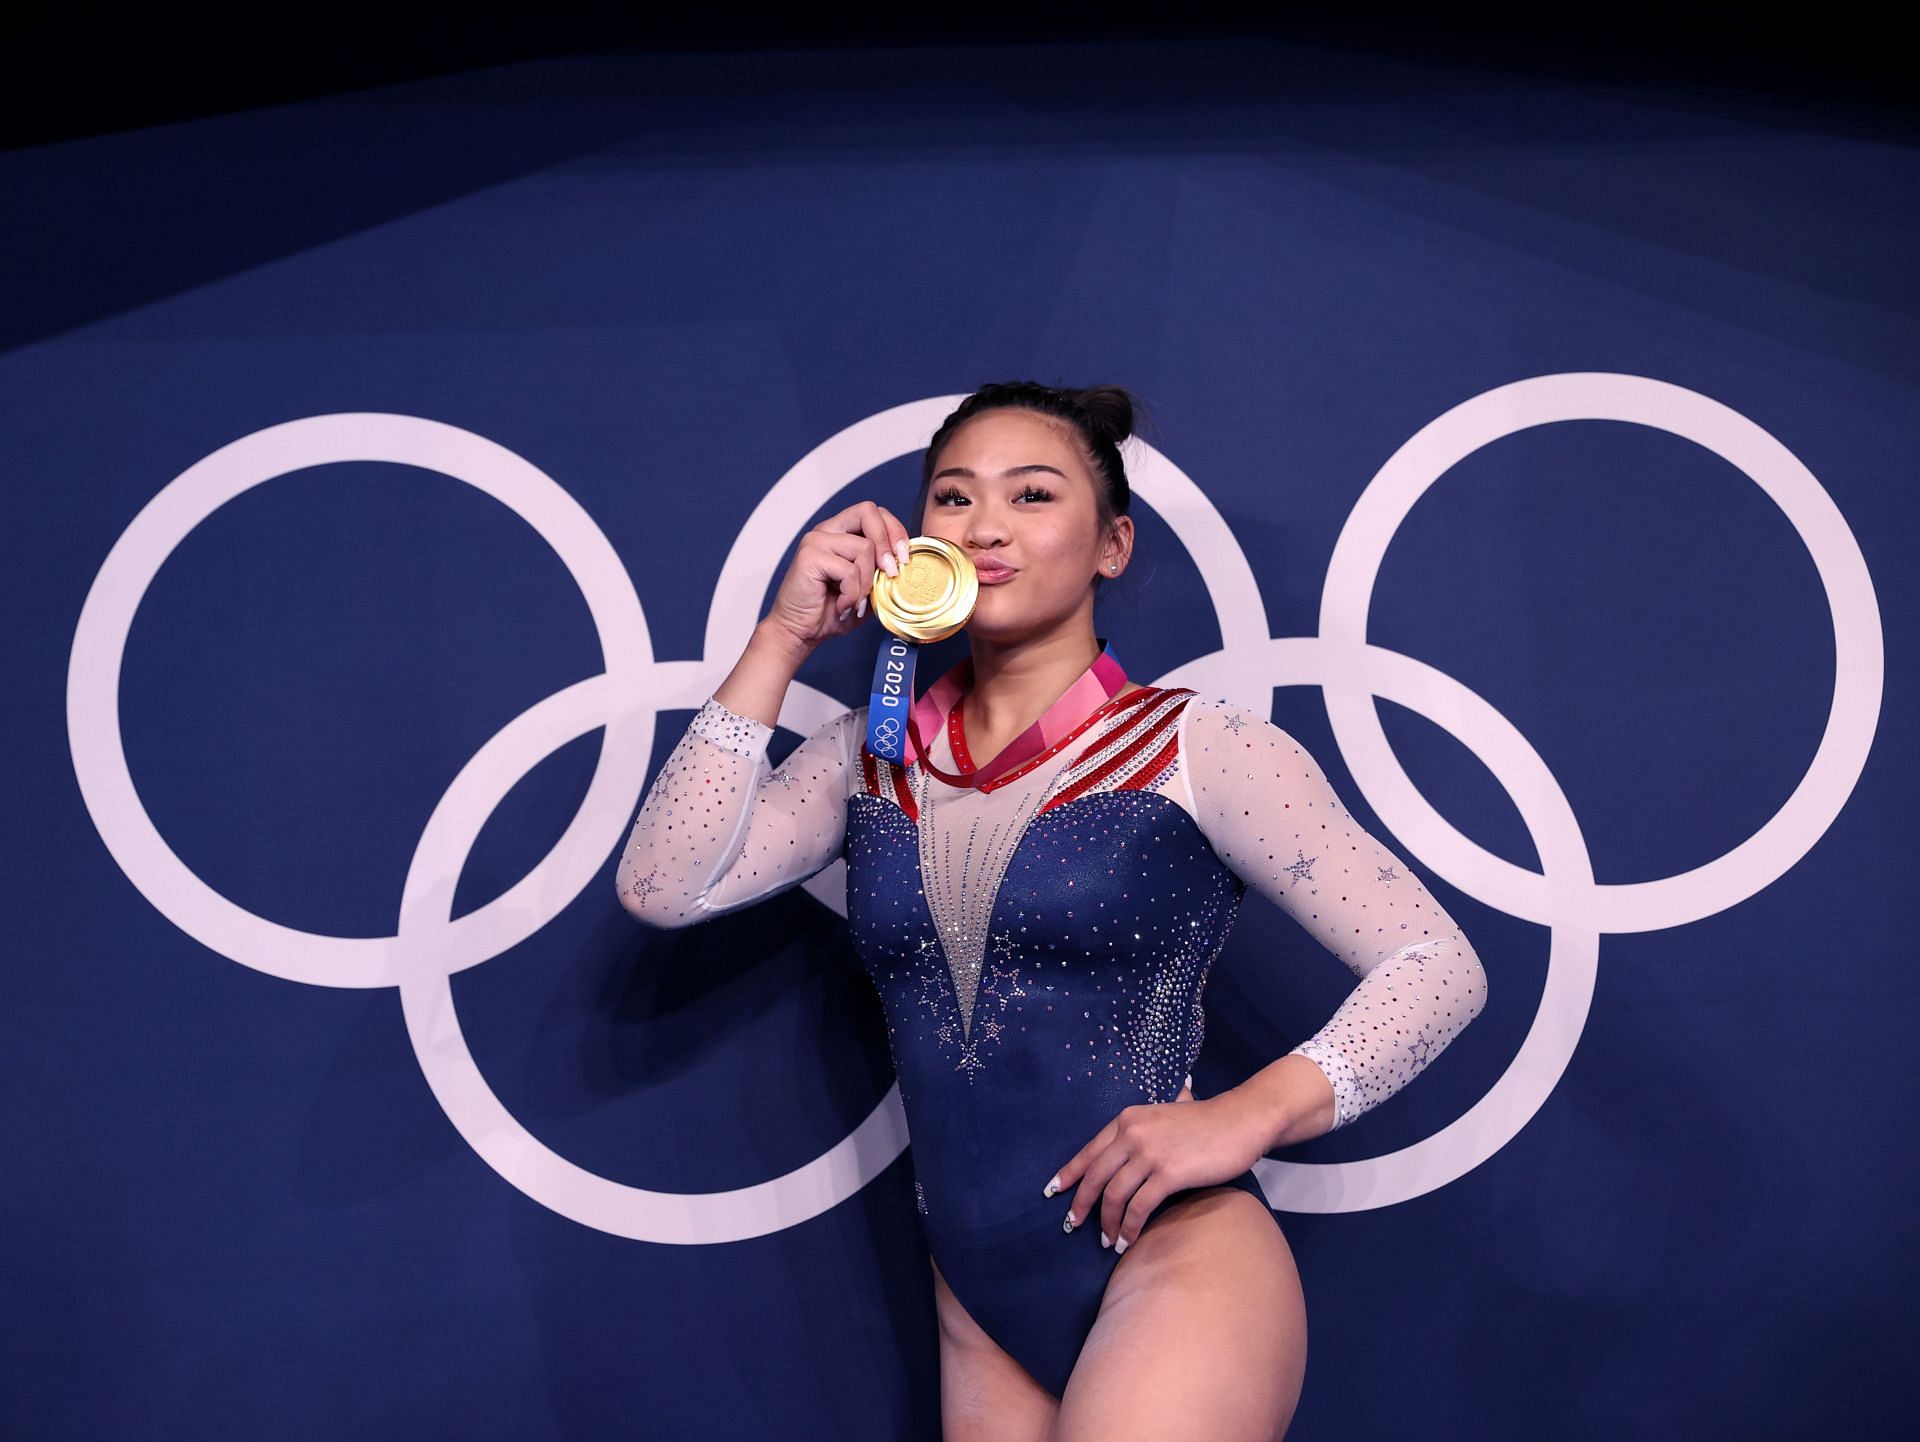 Suni Lee of Team United States poses with her gold medal after winning the Women&#039;s All-Around Final at the 2020 Olympic Games in Tokyo, Japan.